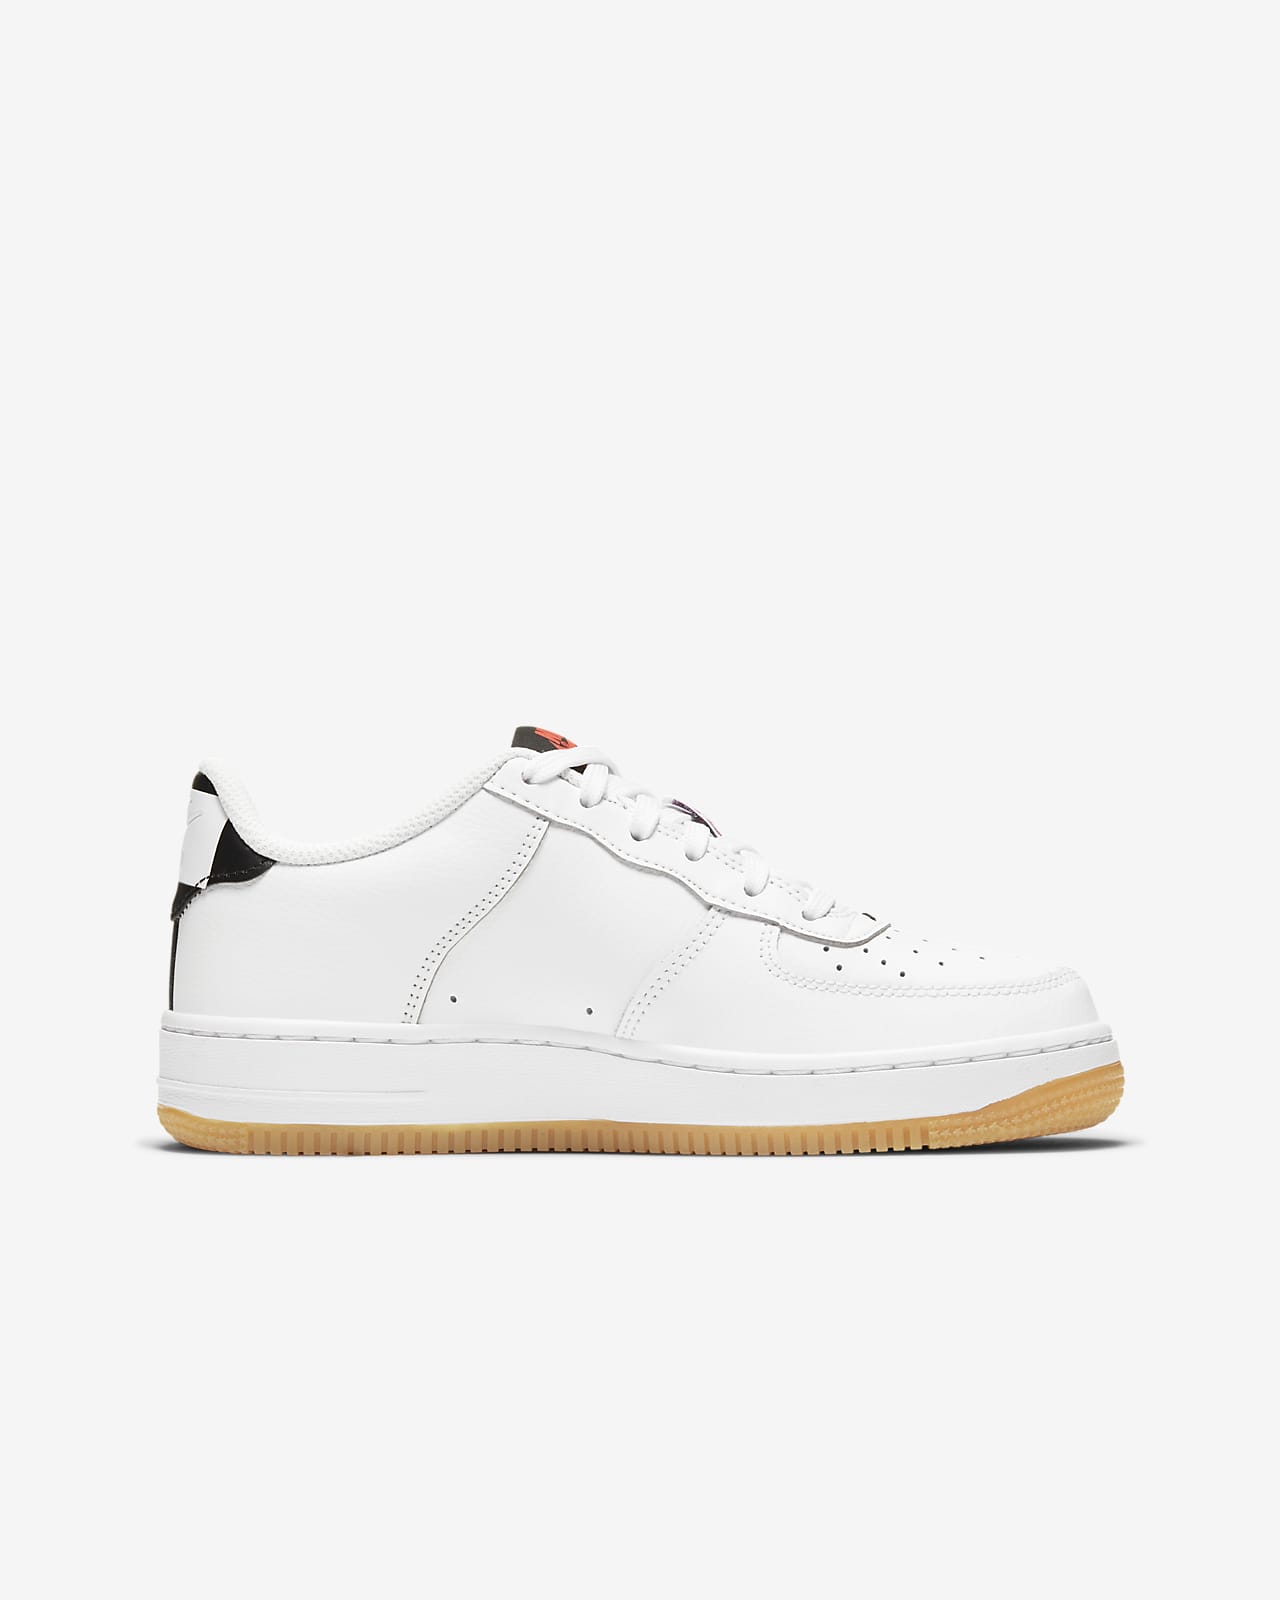 nike air force 1 lv8 youth